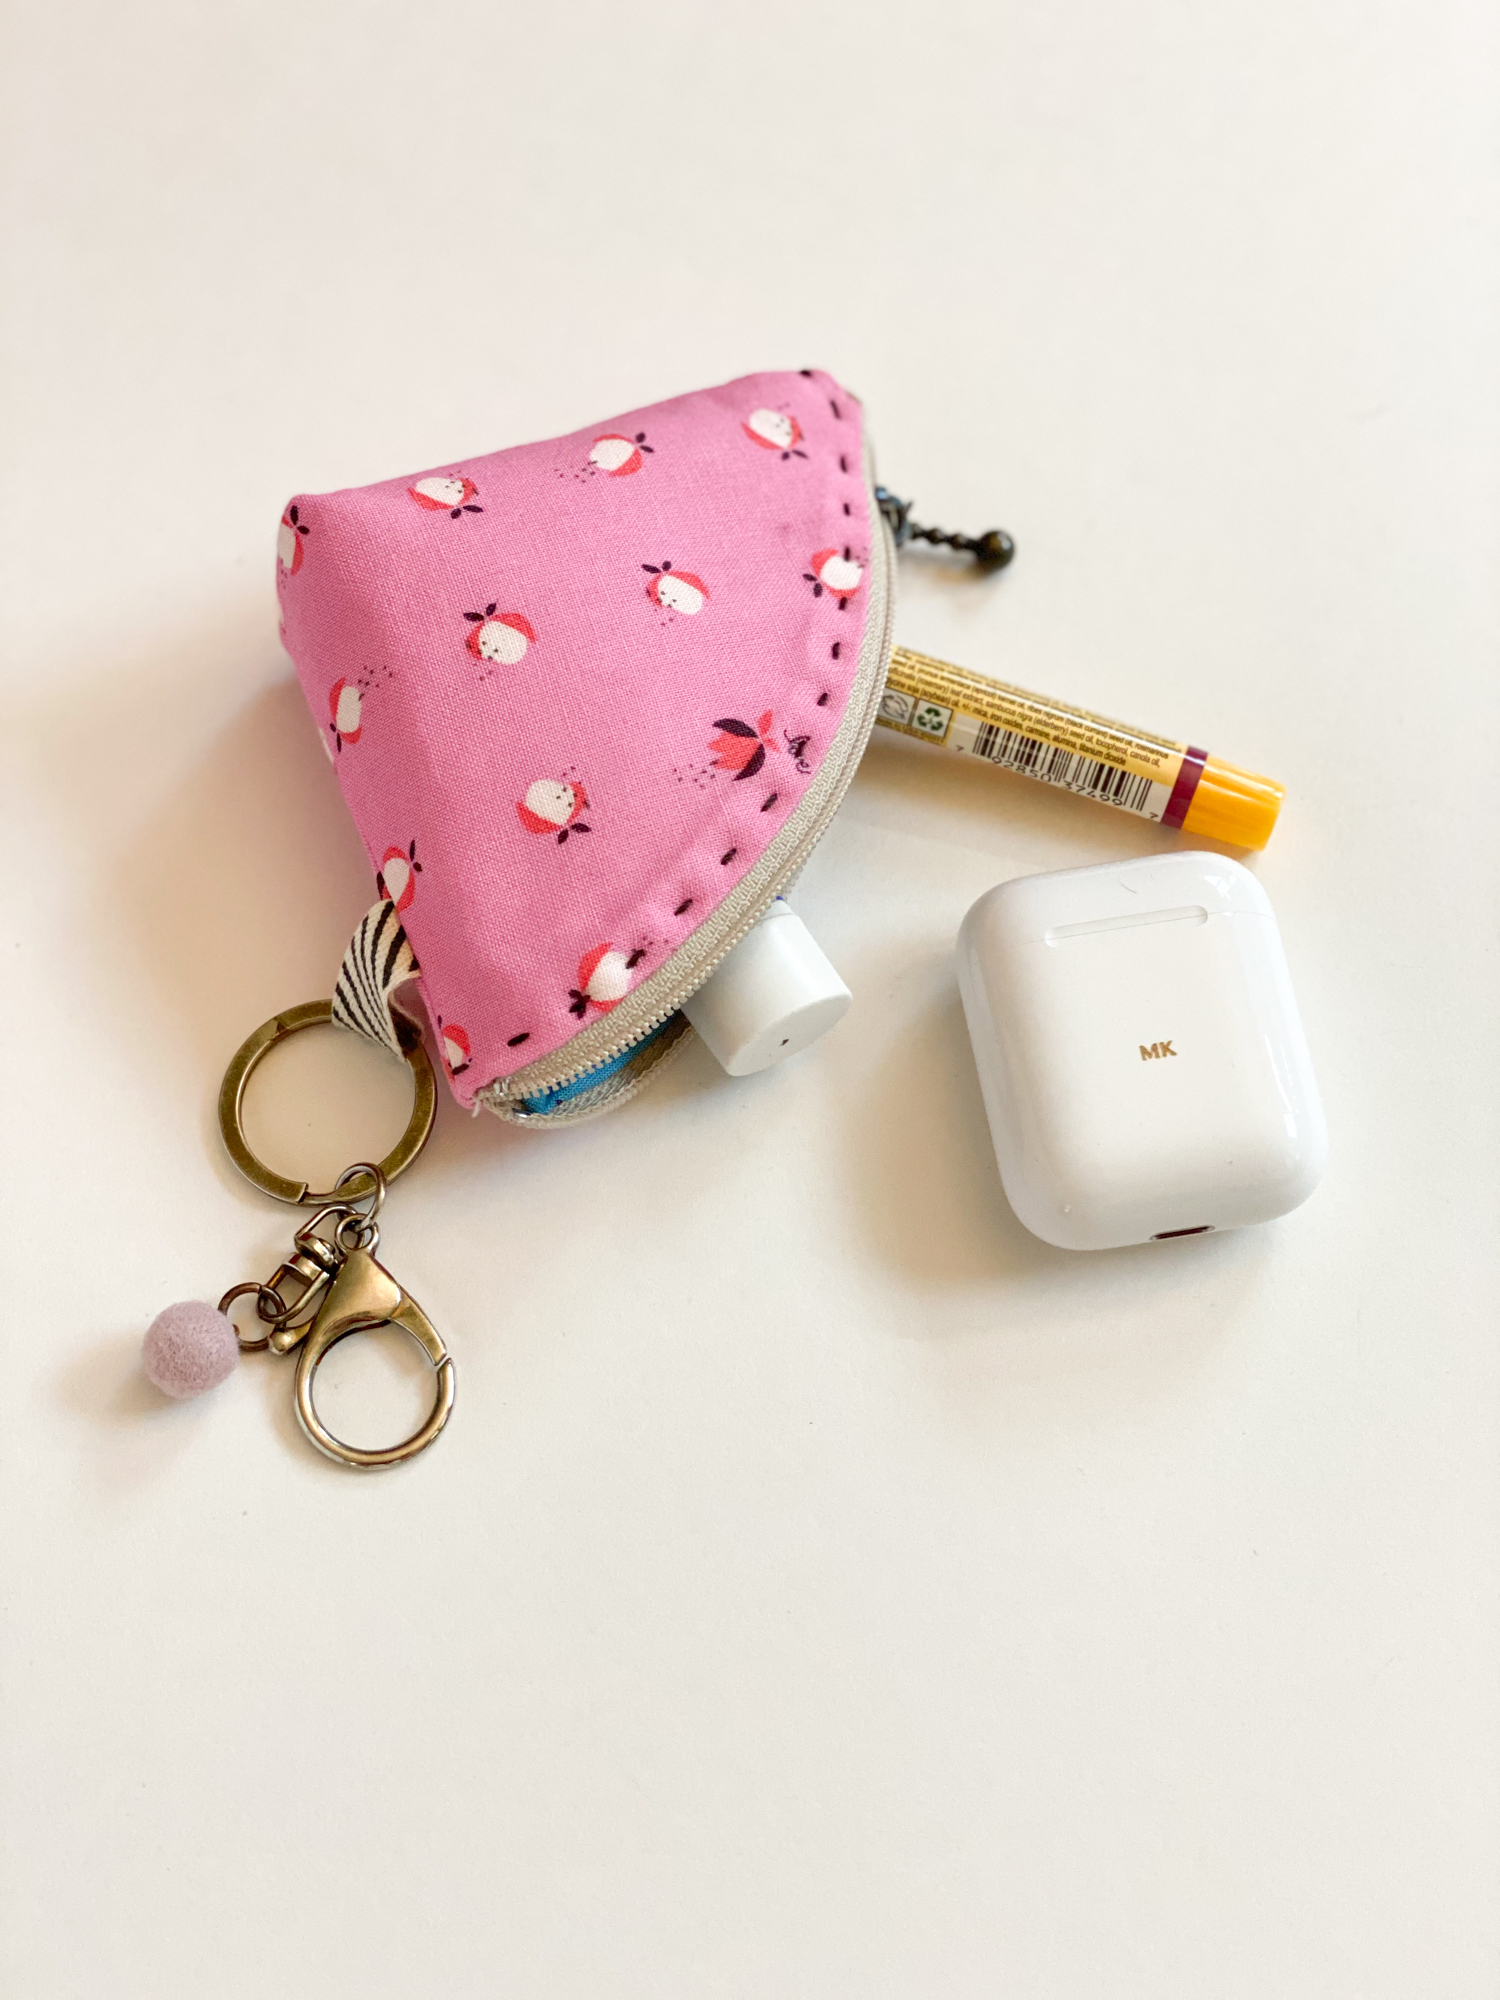 DIY Backpack Coin Pouch Pattern